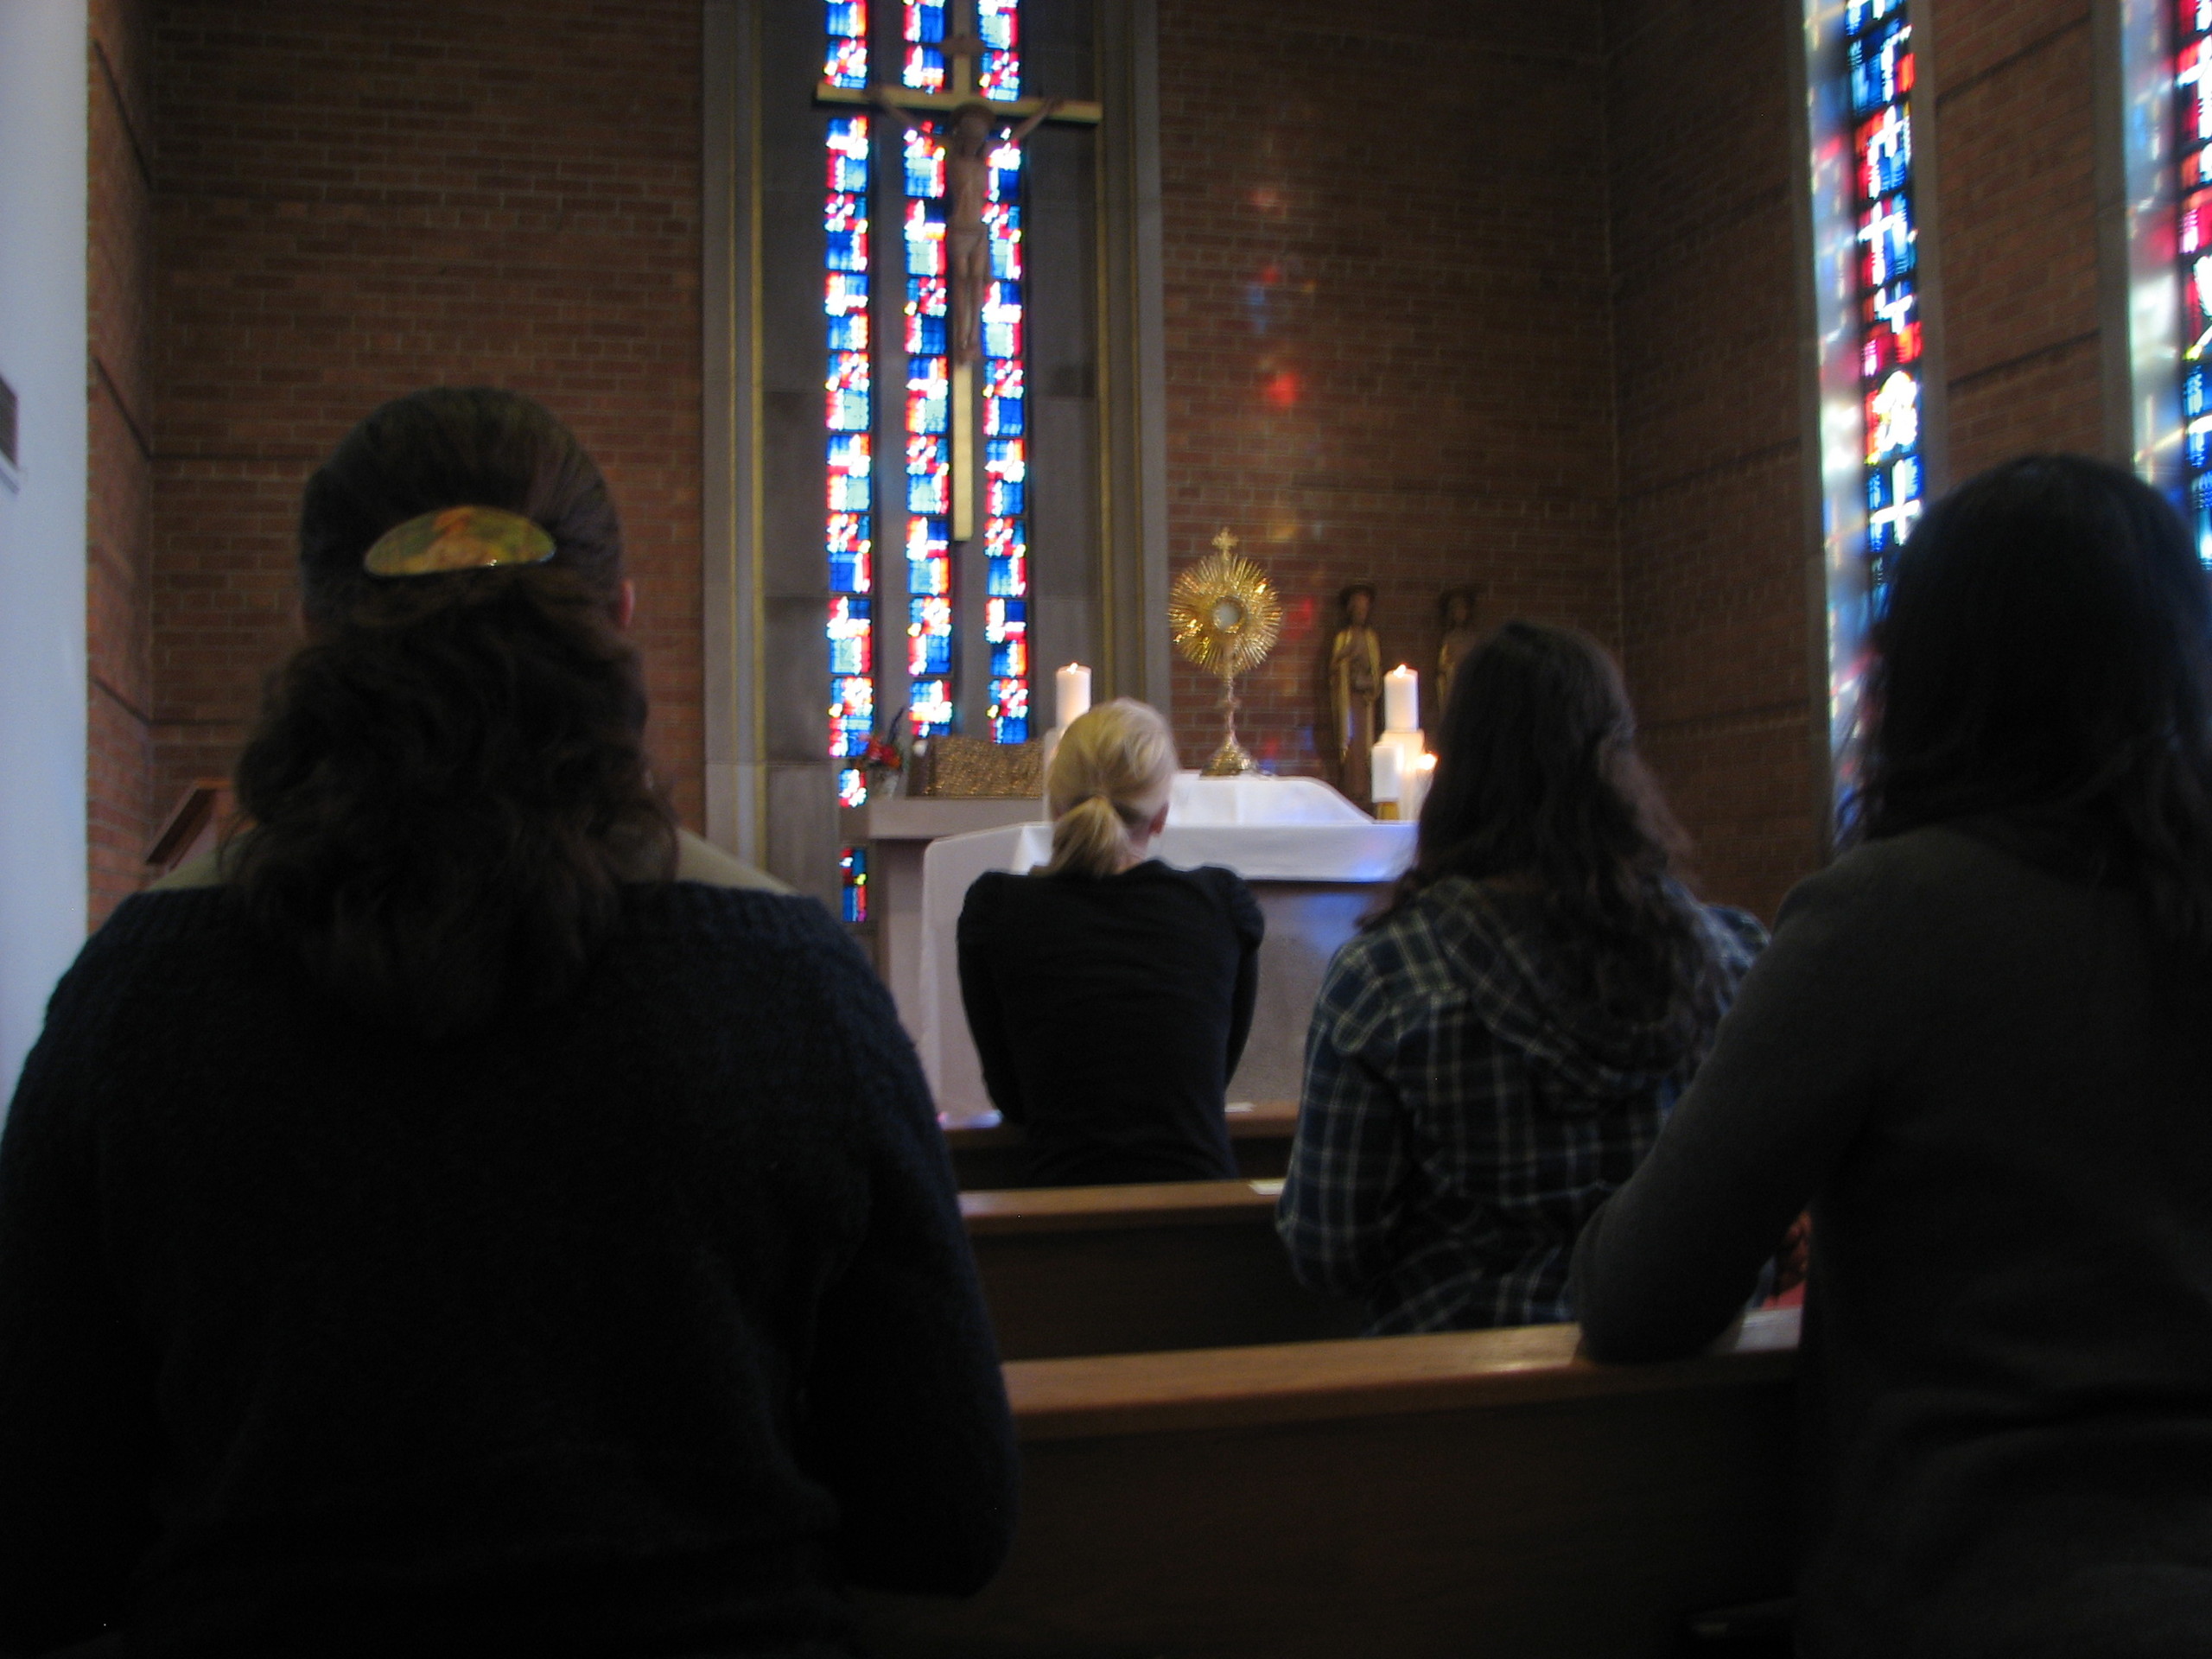 Young Women in Adoration